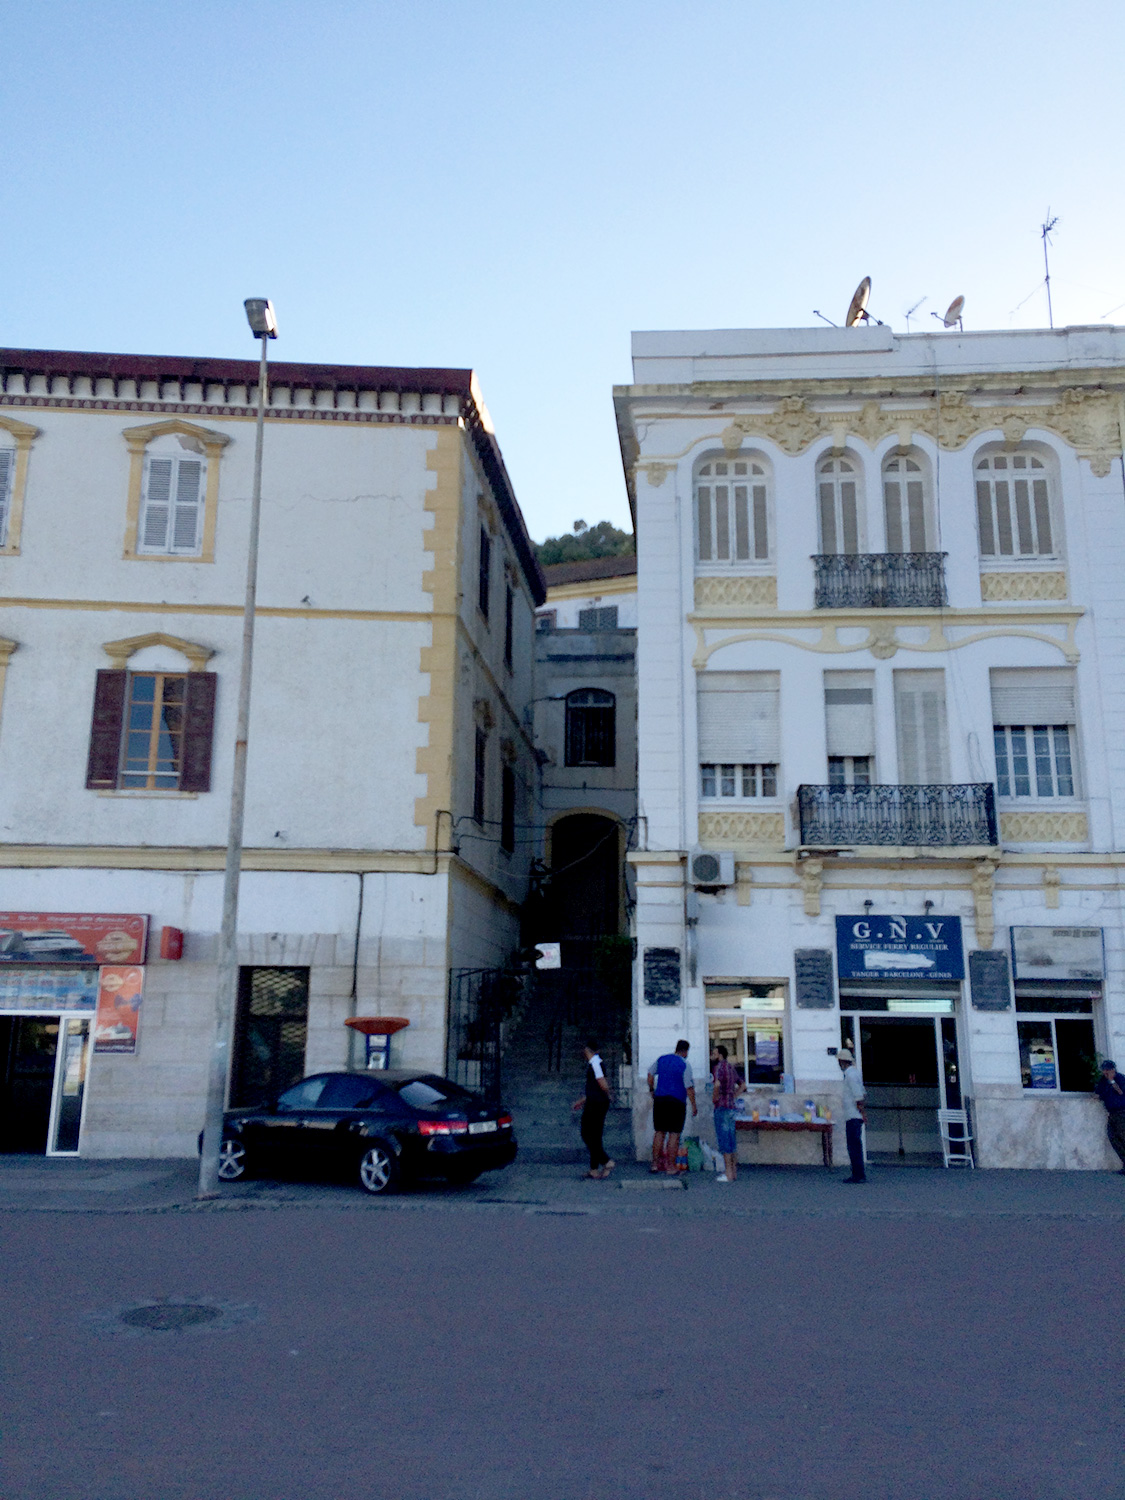 View of Casas Petri on the left and the old Hotel Majestic on the right, separated by an alley